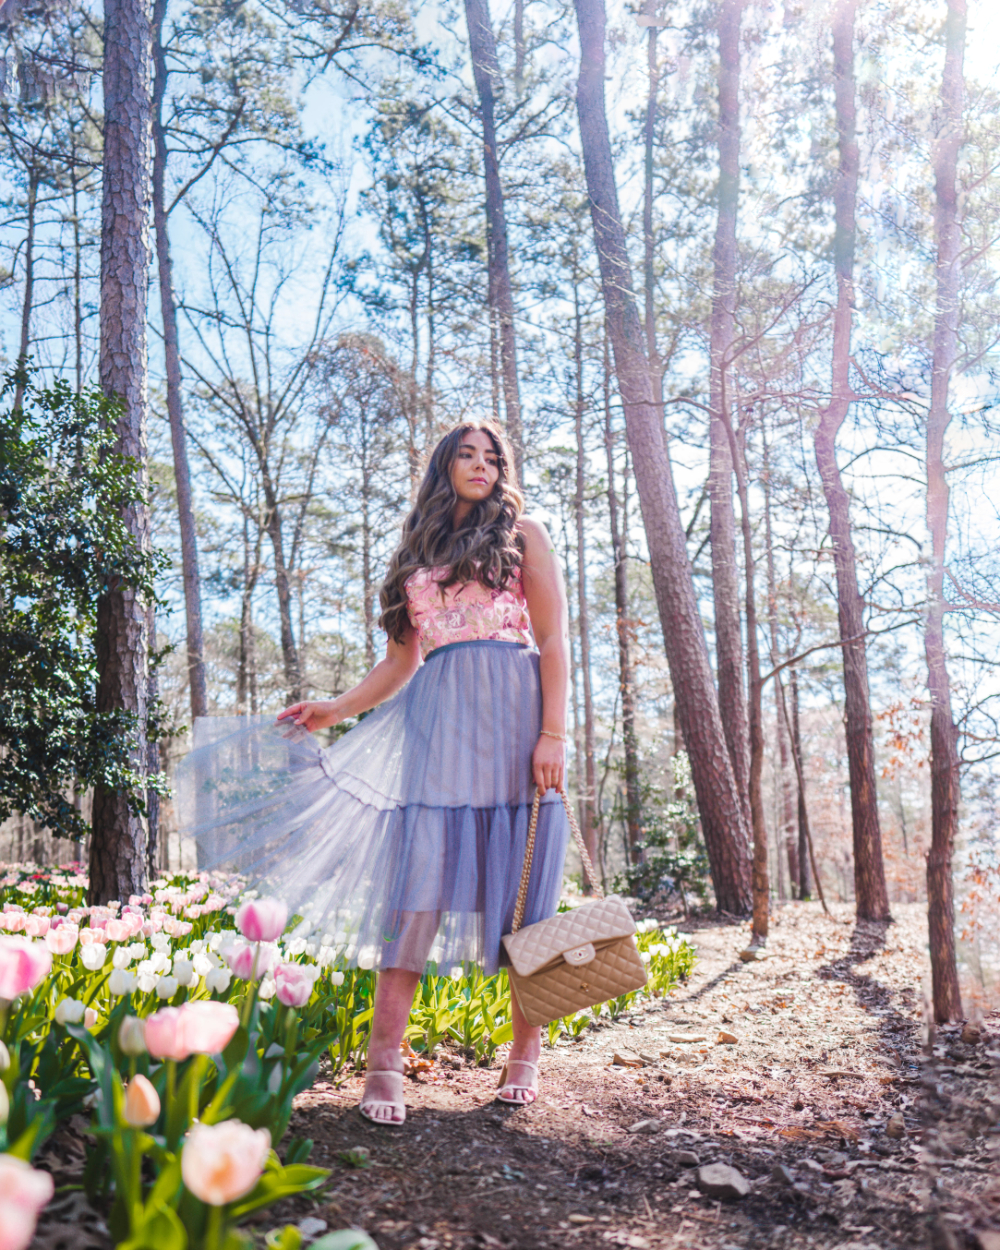 Fashion and style blogger Lauryncakes holds a tulle dress in one hand and a quilted purse in another while wearing a sleevless floral bustier and heels standing in the Garvan Gardens next to blooming tulips in the spring